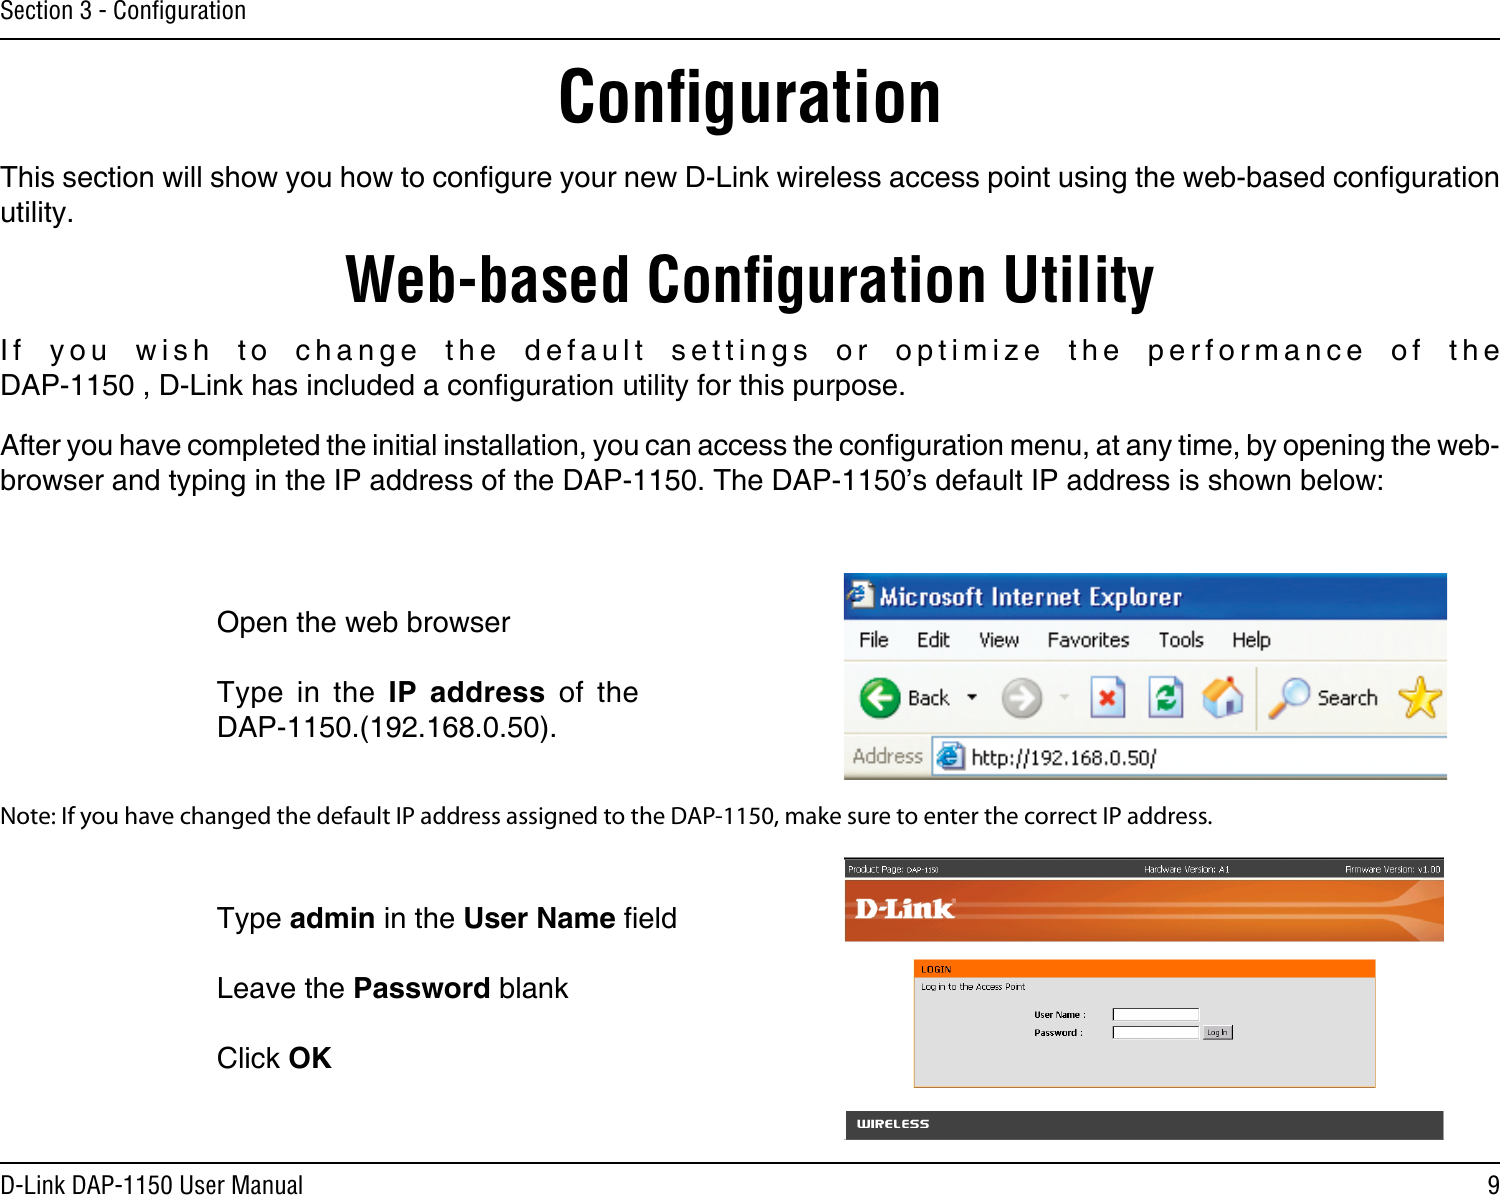 9D-Link DAP-1150 User ManualSection 3 - ConﬁgurationConﬁgurationThis section will show you how to congure your new D-Link wireless access point using the web-based conguration utility.Web-based Conﬁguration UtilityOpen the web browserType  in  the  IP  address  of  the DAP-1150.(192.168.0.50).If  you  wish  to  change  the  default  settings  or  optimize  the  performance  of  the DAP-1150 , D-Link has included a conguration utility for this purpose.After you have completed the initial installation, you can access the conguration menu, at any time, by opening the web-browser and typing in the IP address of the DAP-1150. The DAP-1150’s default IP address is shown below:Note: If you have changed the default IP address assigned to the DAP-1150, make sure to enter the correct IP address. Type admin in the User Name eld Leave the Password blankClick OK